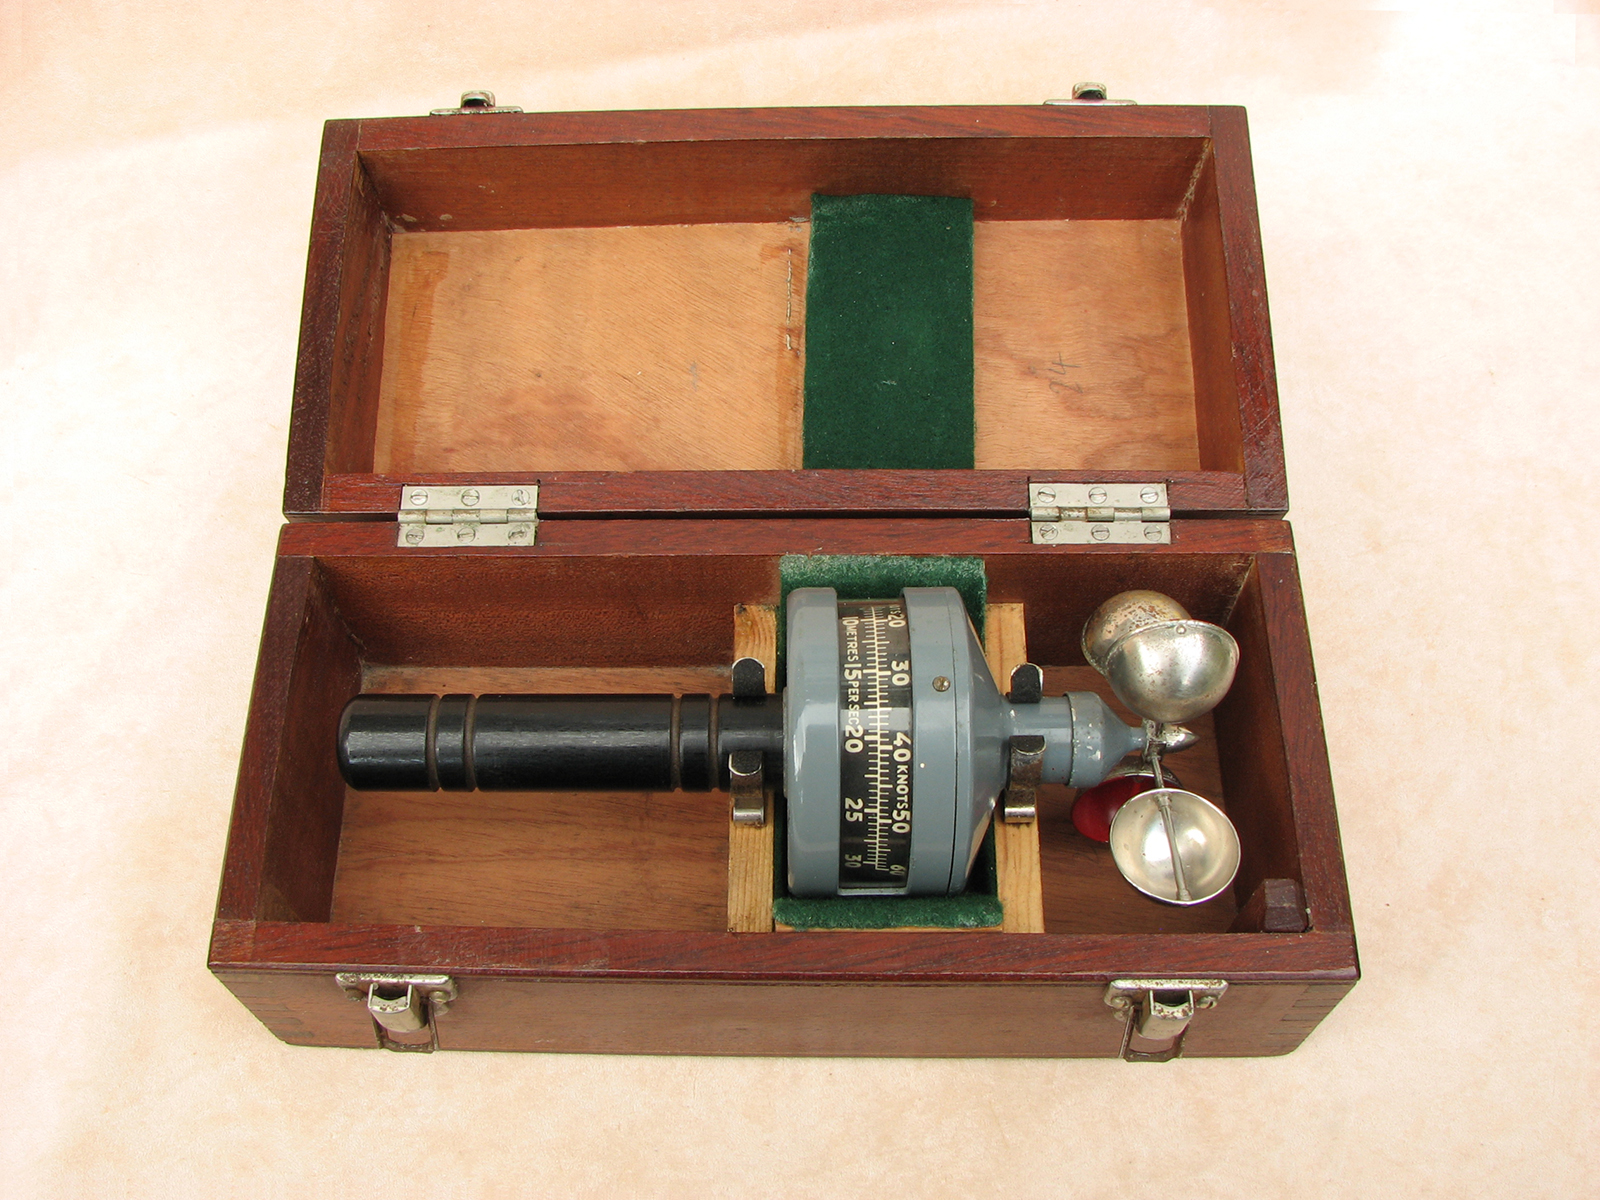 1950's Kelvin & Hughes hand anemometer with case